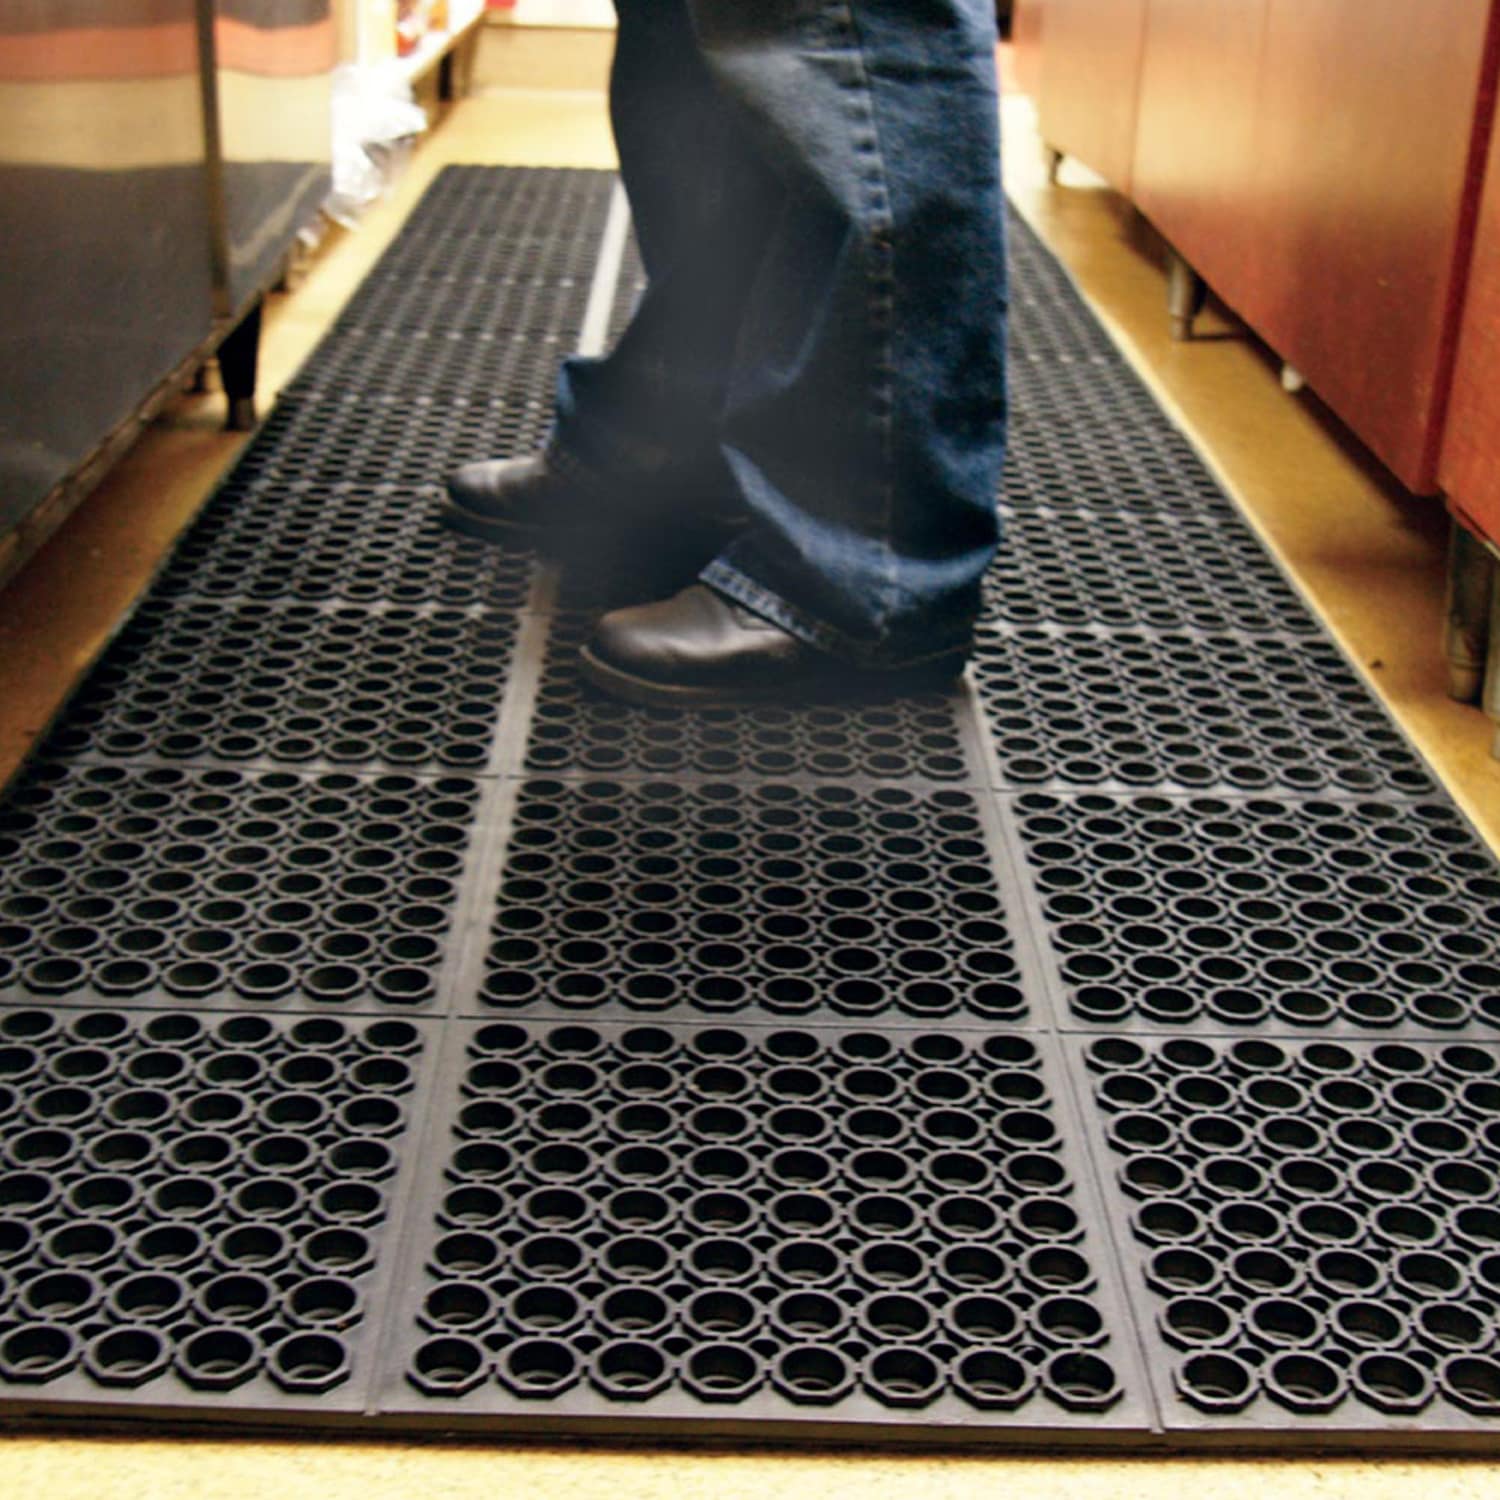 Pacifica RAM02 Black Rubber Appliance Mat at The Good Guys